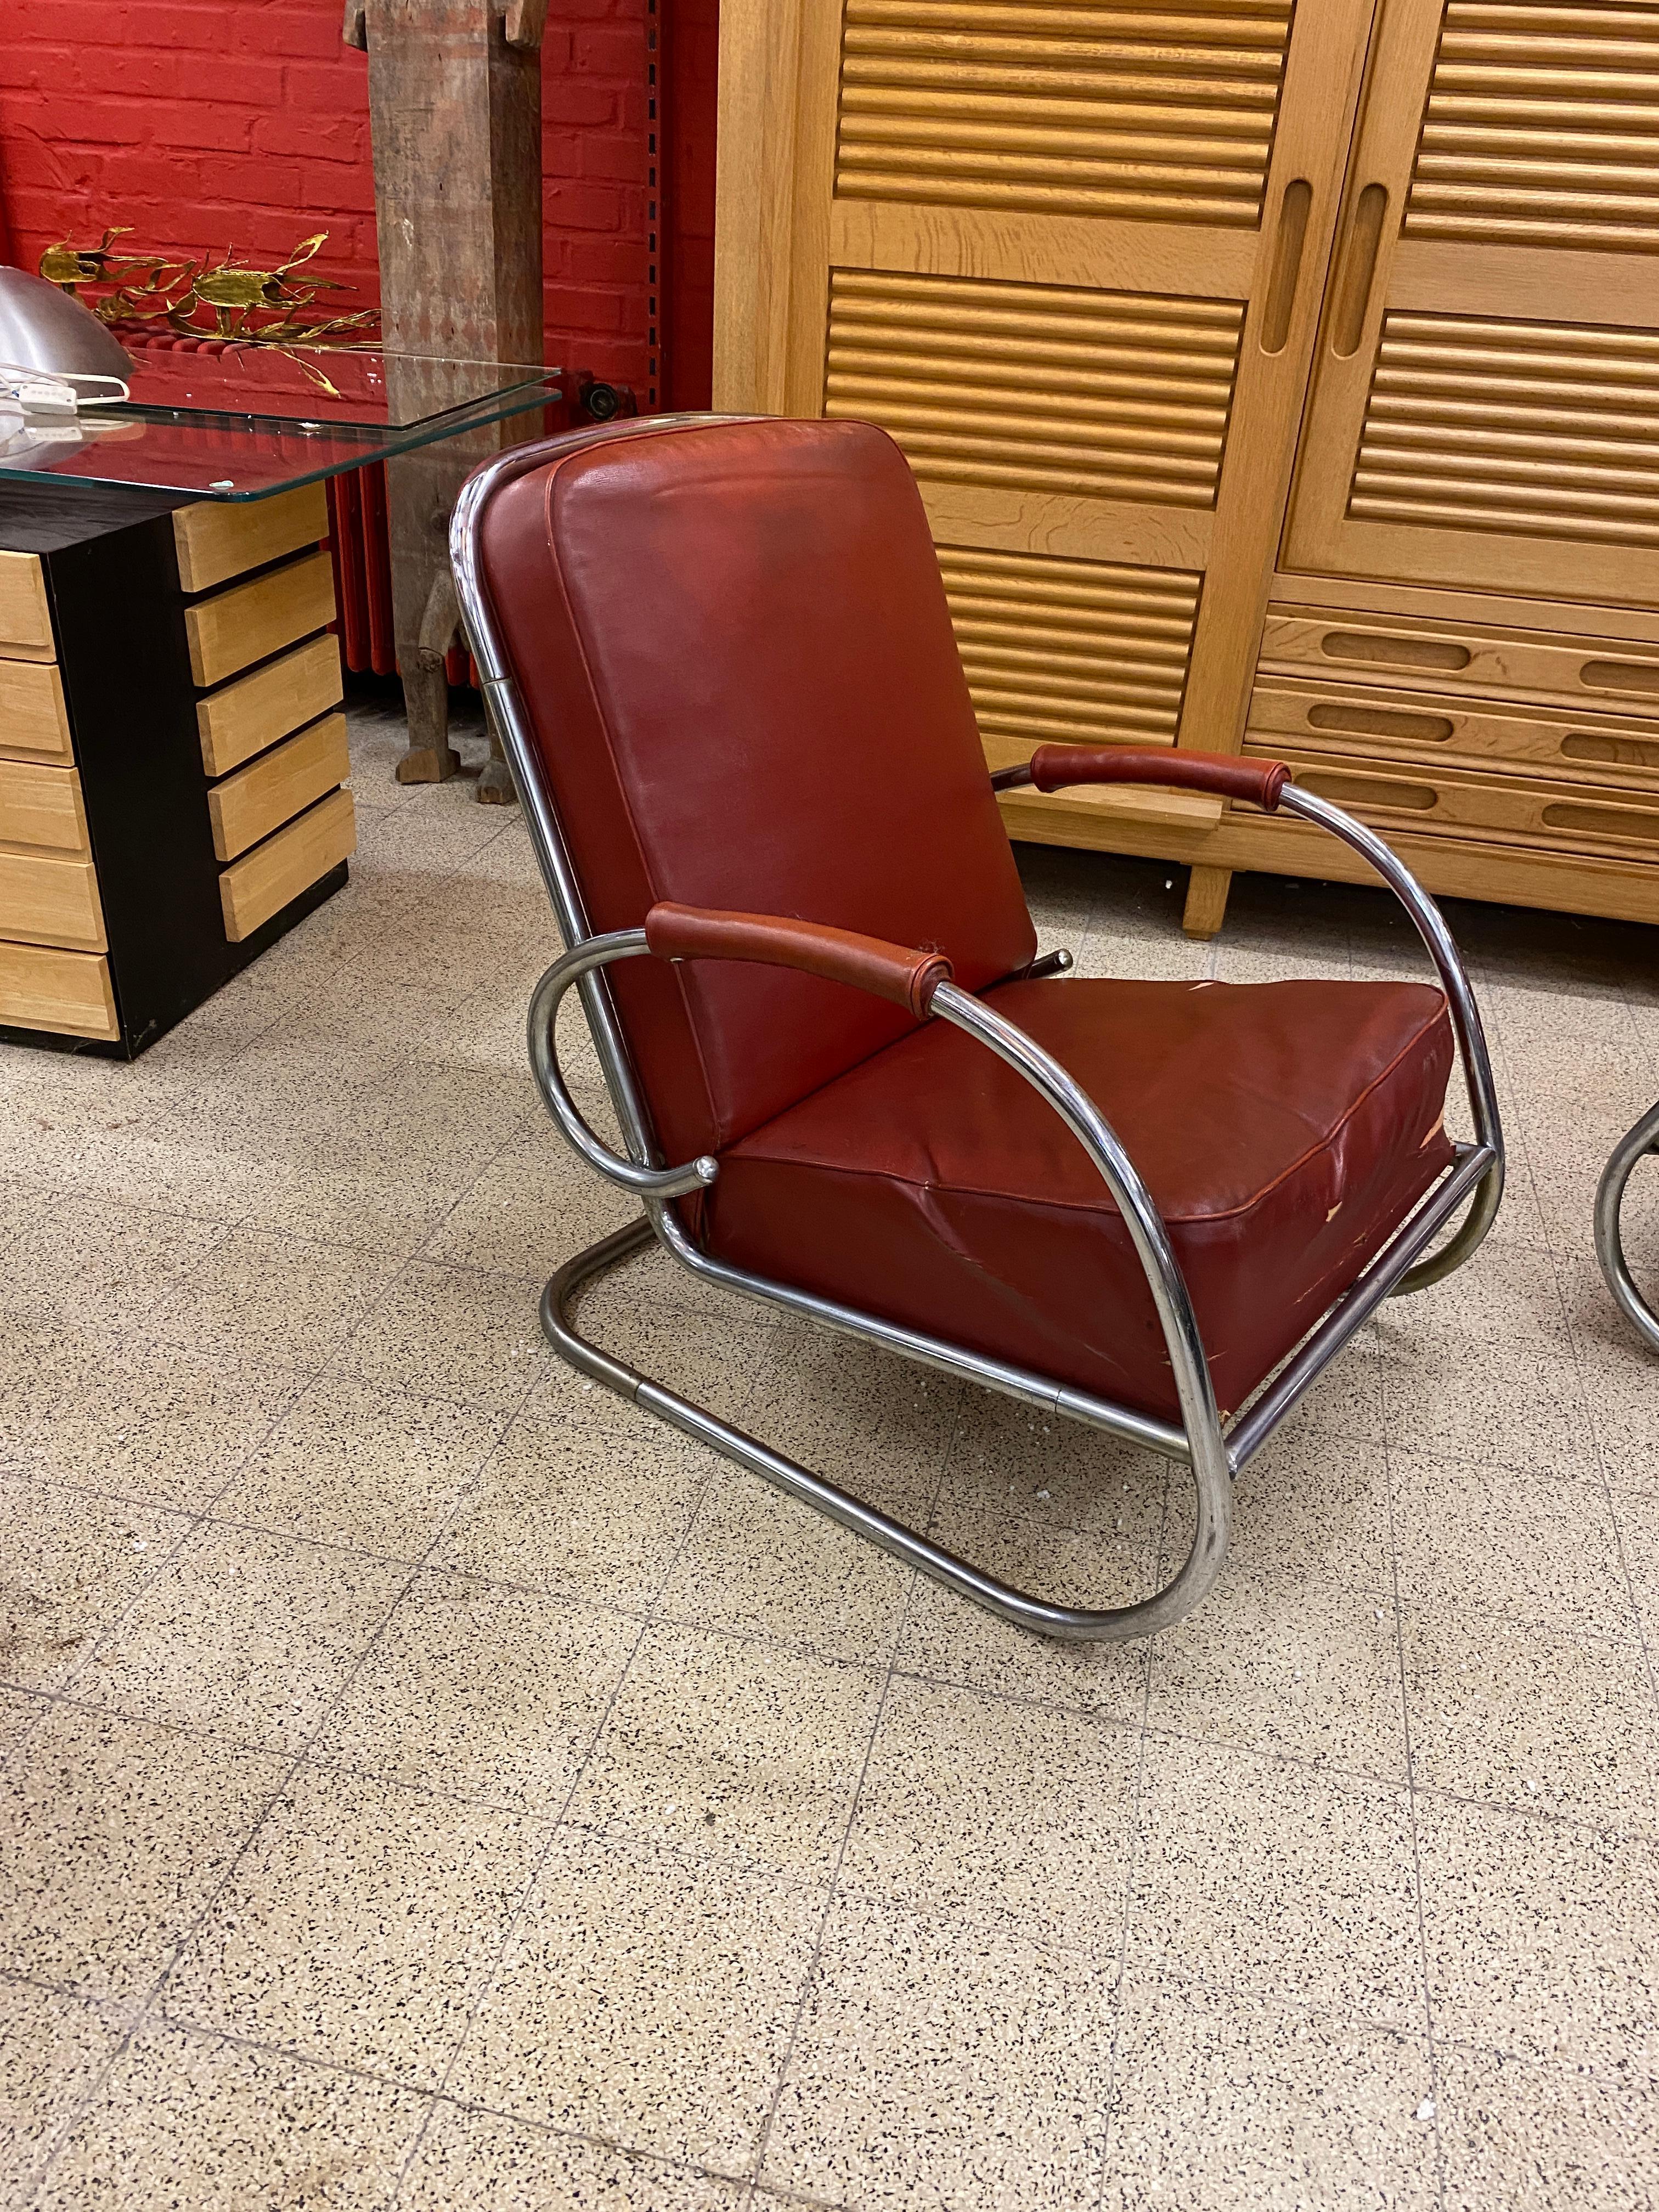 2 Modernist Art Deco Armchairs in Chromed Metal and Faux Leather circa 1920-1930 For Sale 3